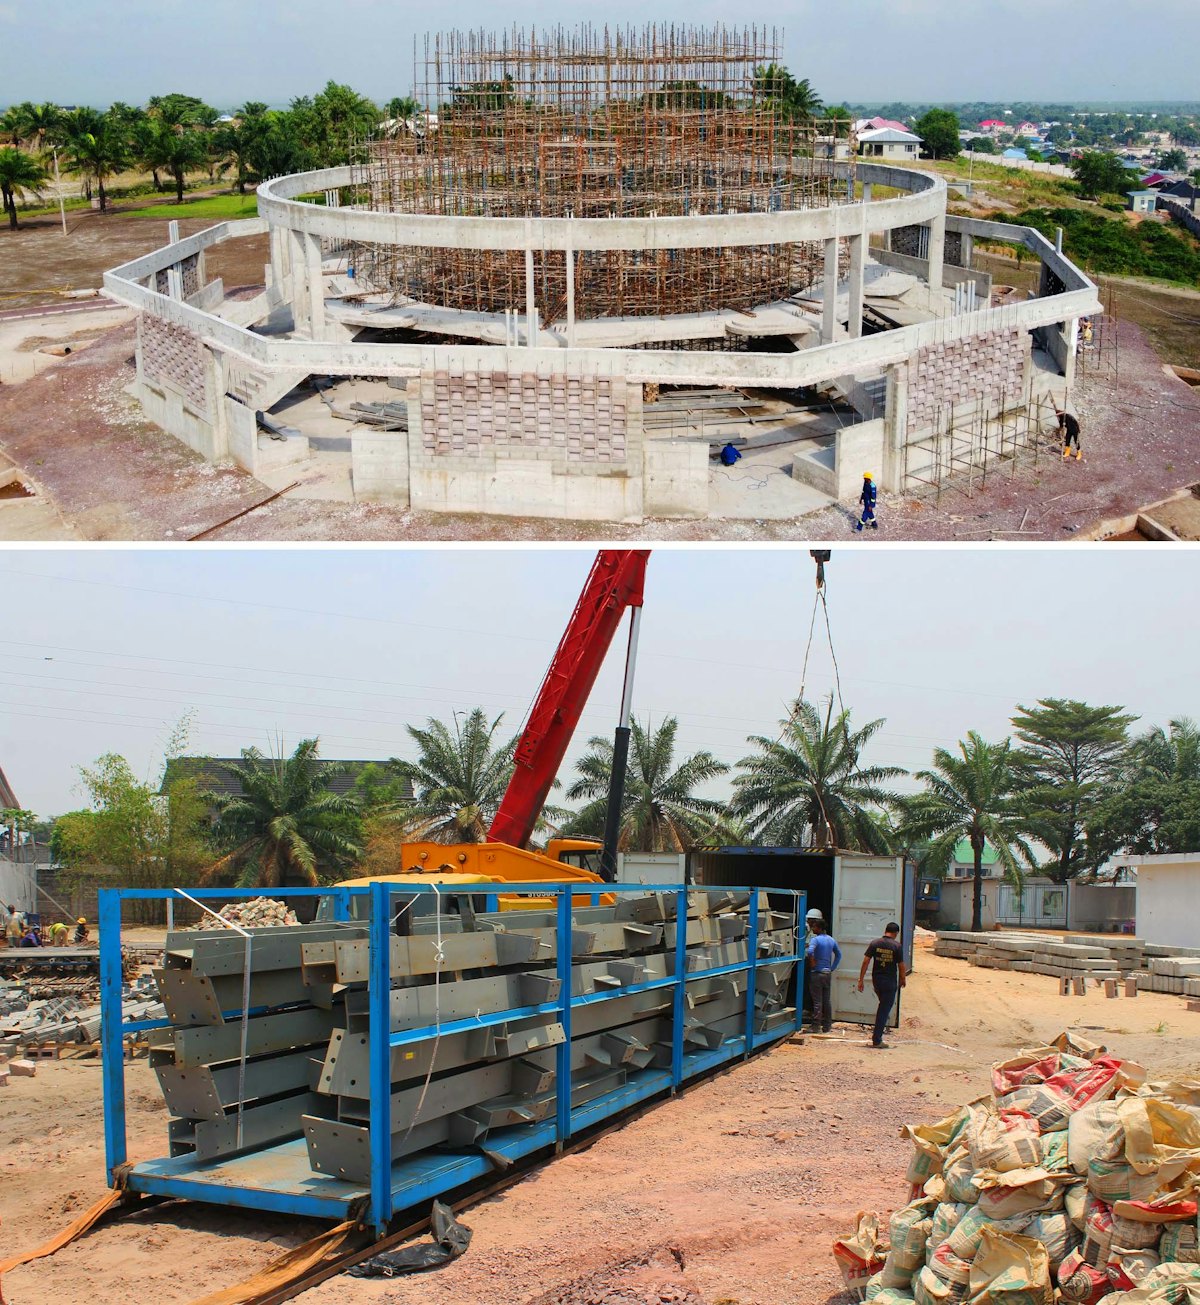 Soon after the concrete structure of the ground floor and gallery level of the temple was completed (top), the structural steel elements needed for the dome superstructure arrived at the site (bottom).